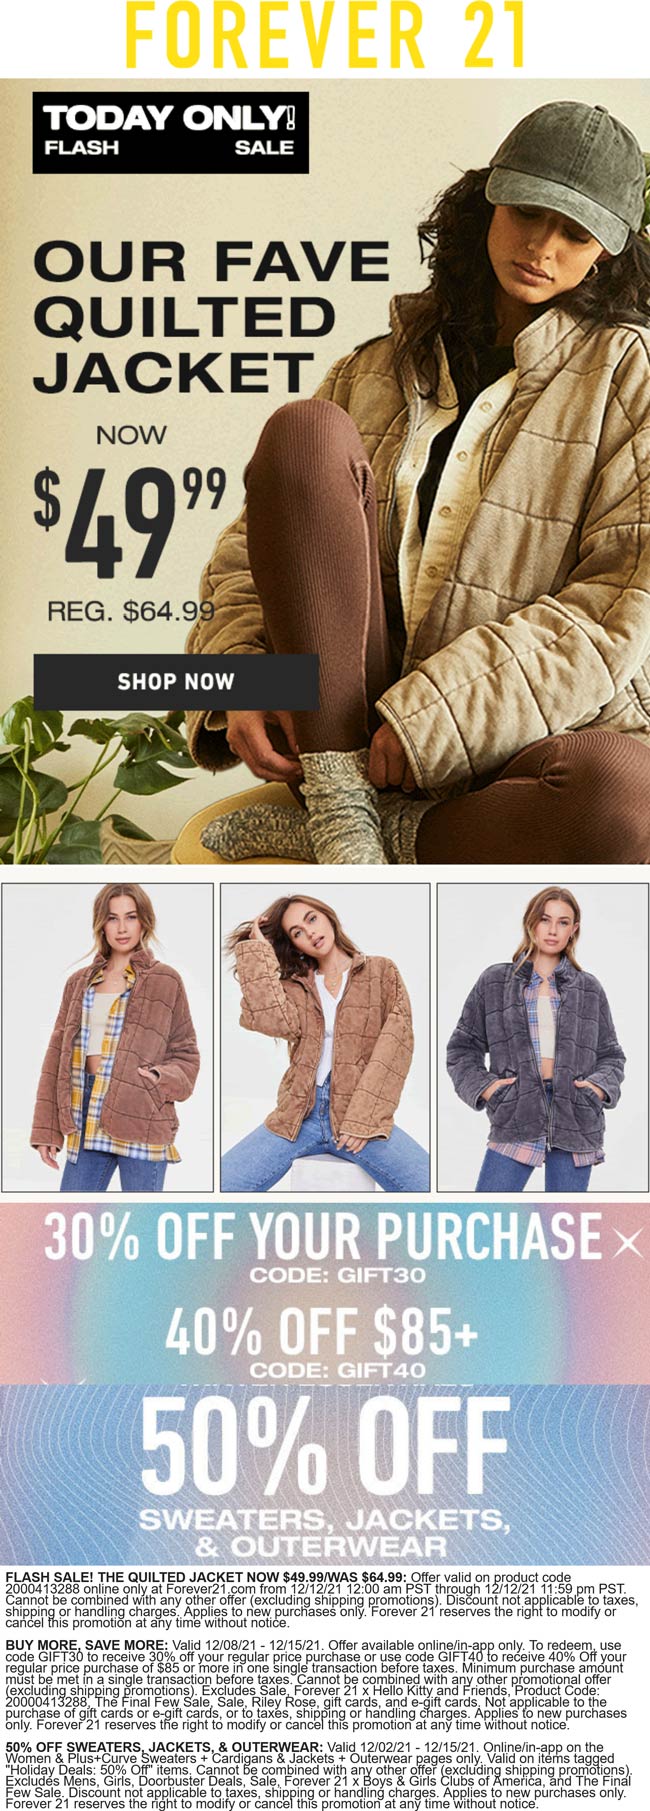 Forever 21 stores Coupon  40% off $85+ at Forever 21 via promo code GIFT40 #forever21 